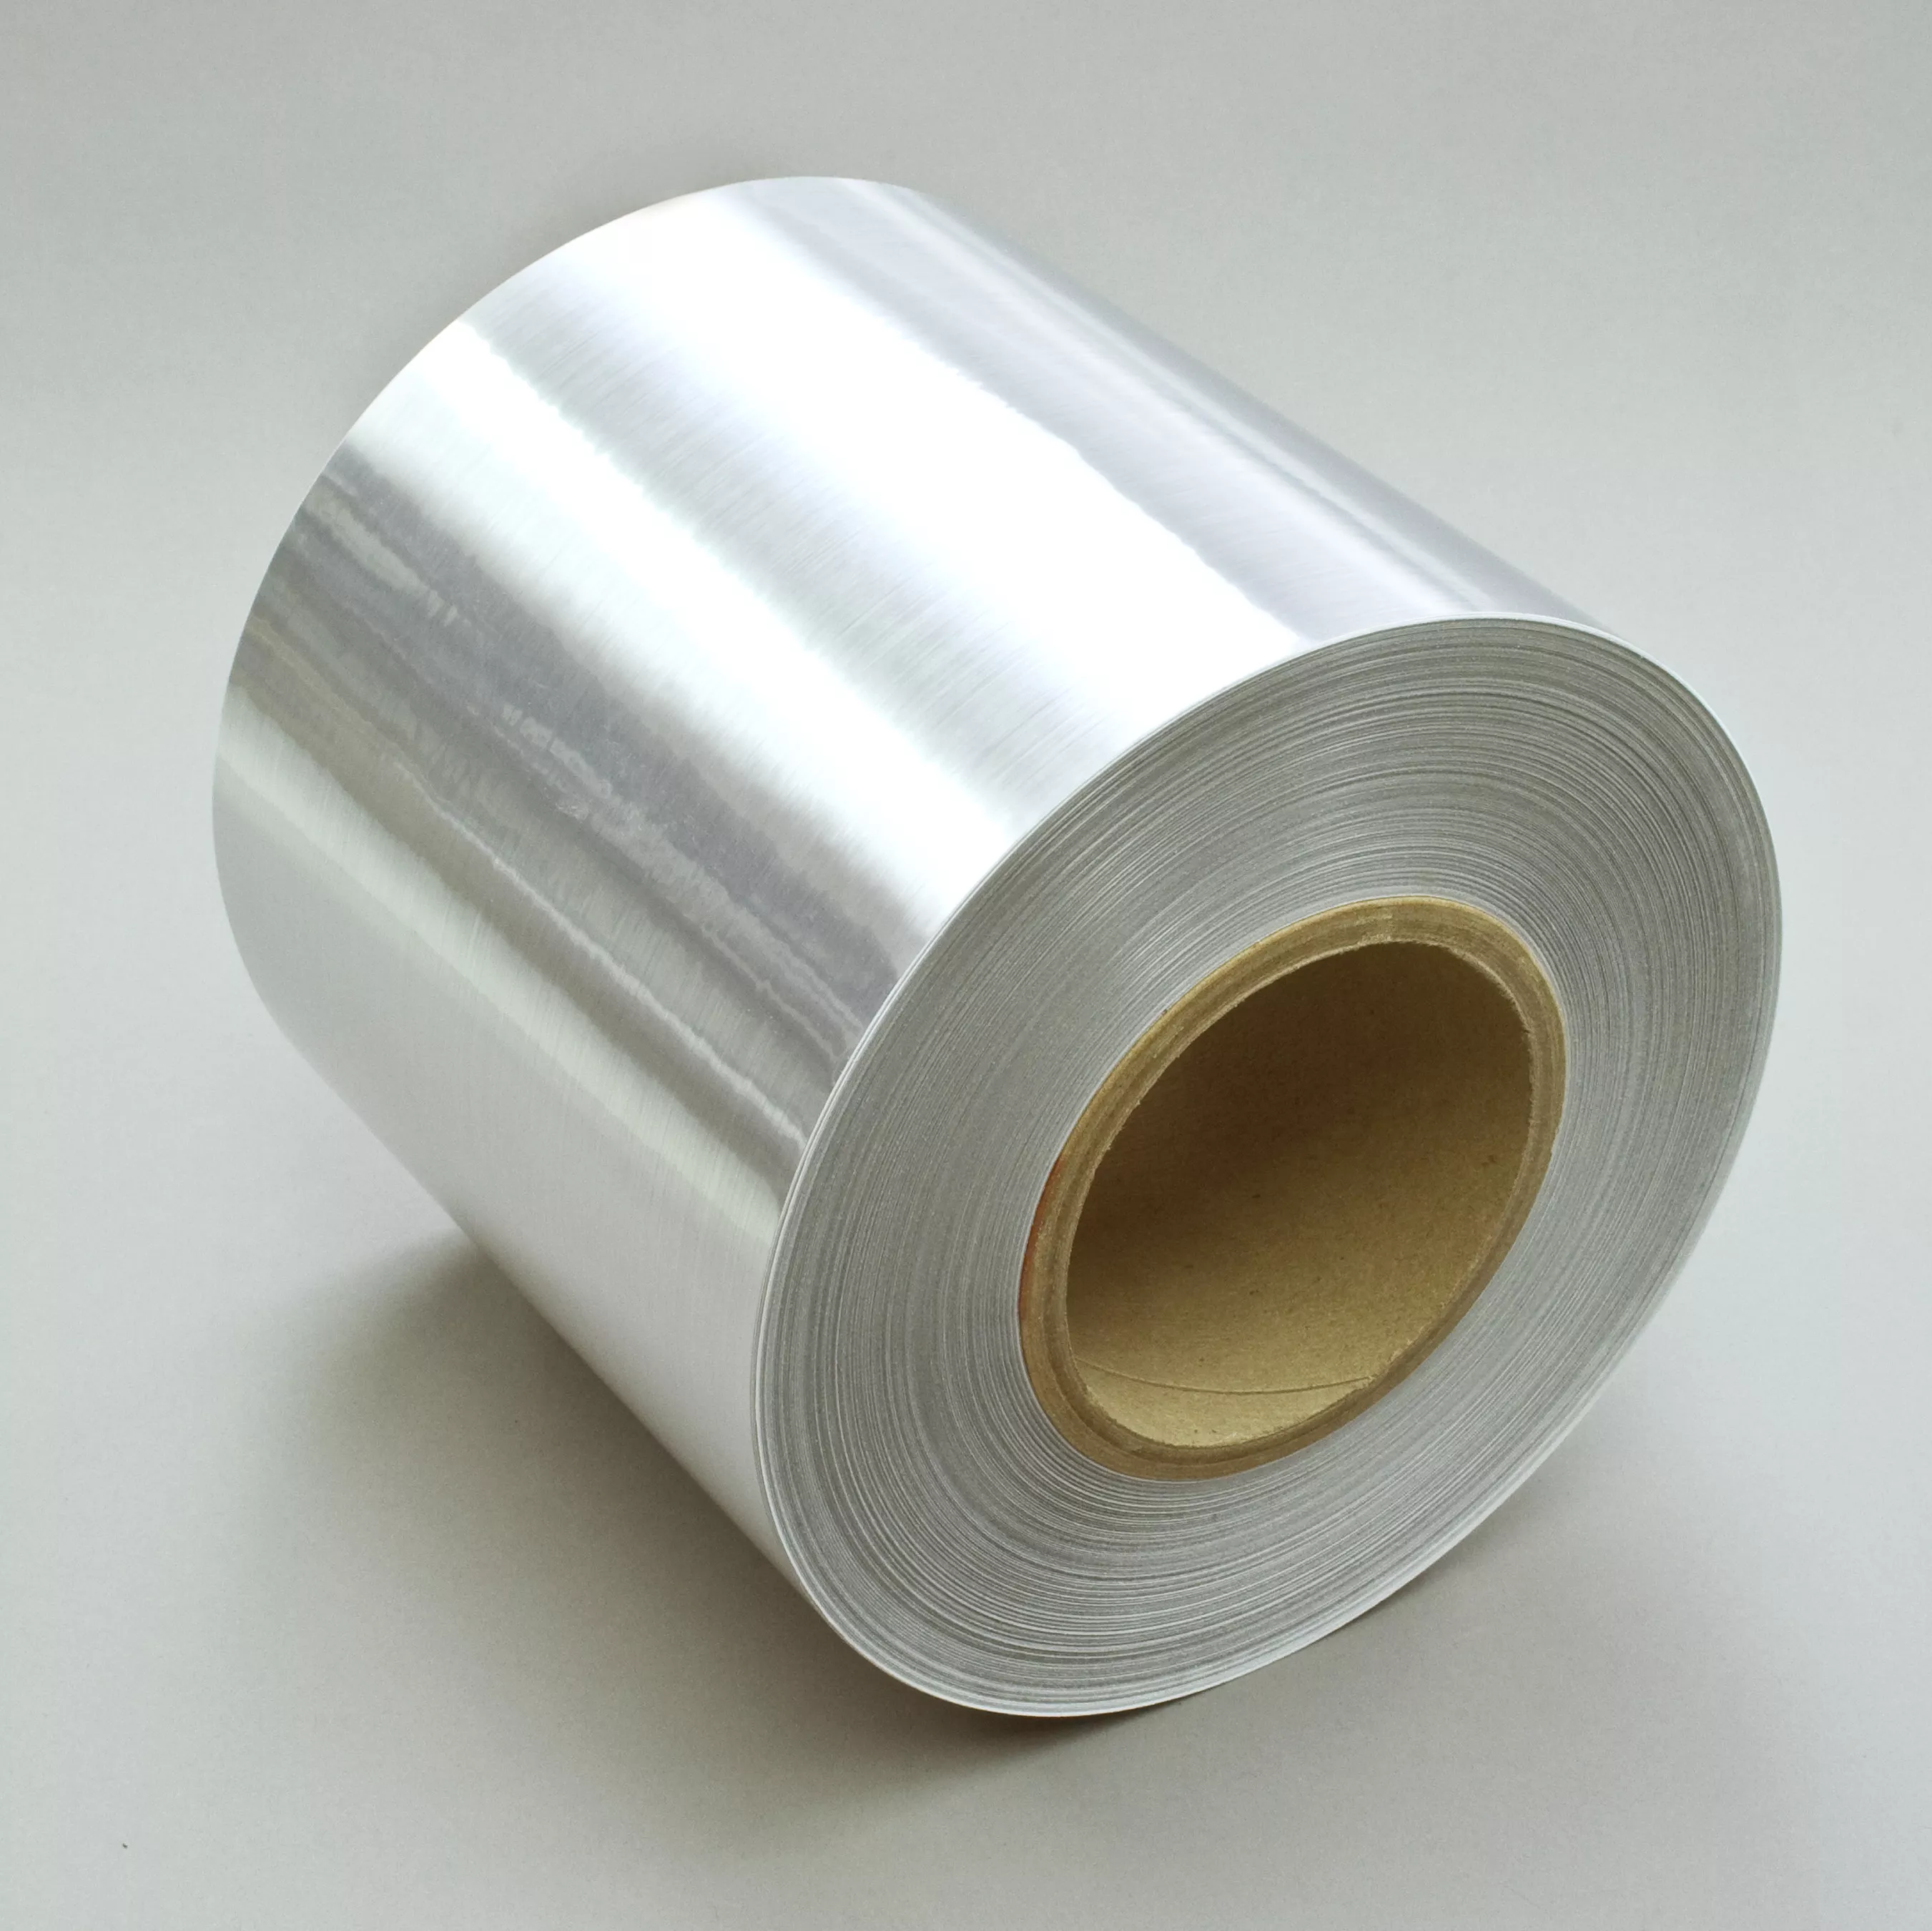 3M™ Sheet and Screen Label Material 7909S, Brushed Silver Polyester, 508 mm x 686 mm, 100 Sheet/Case